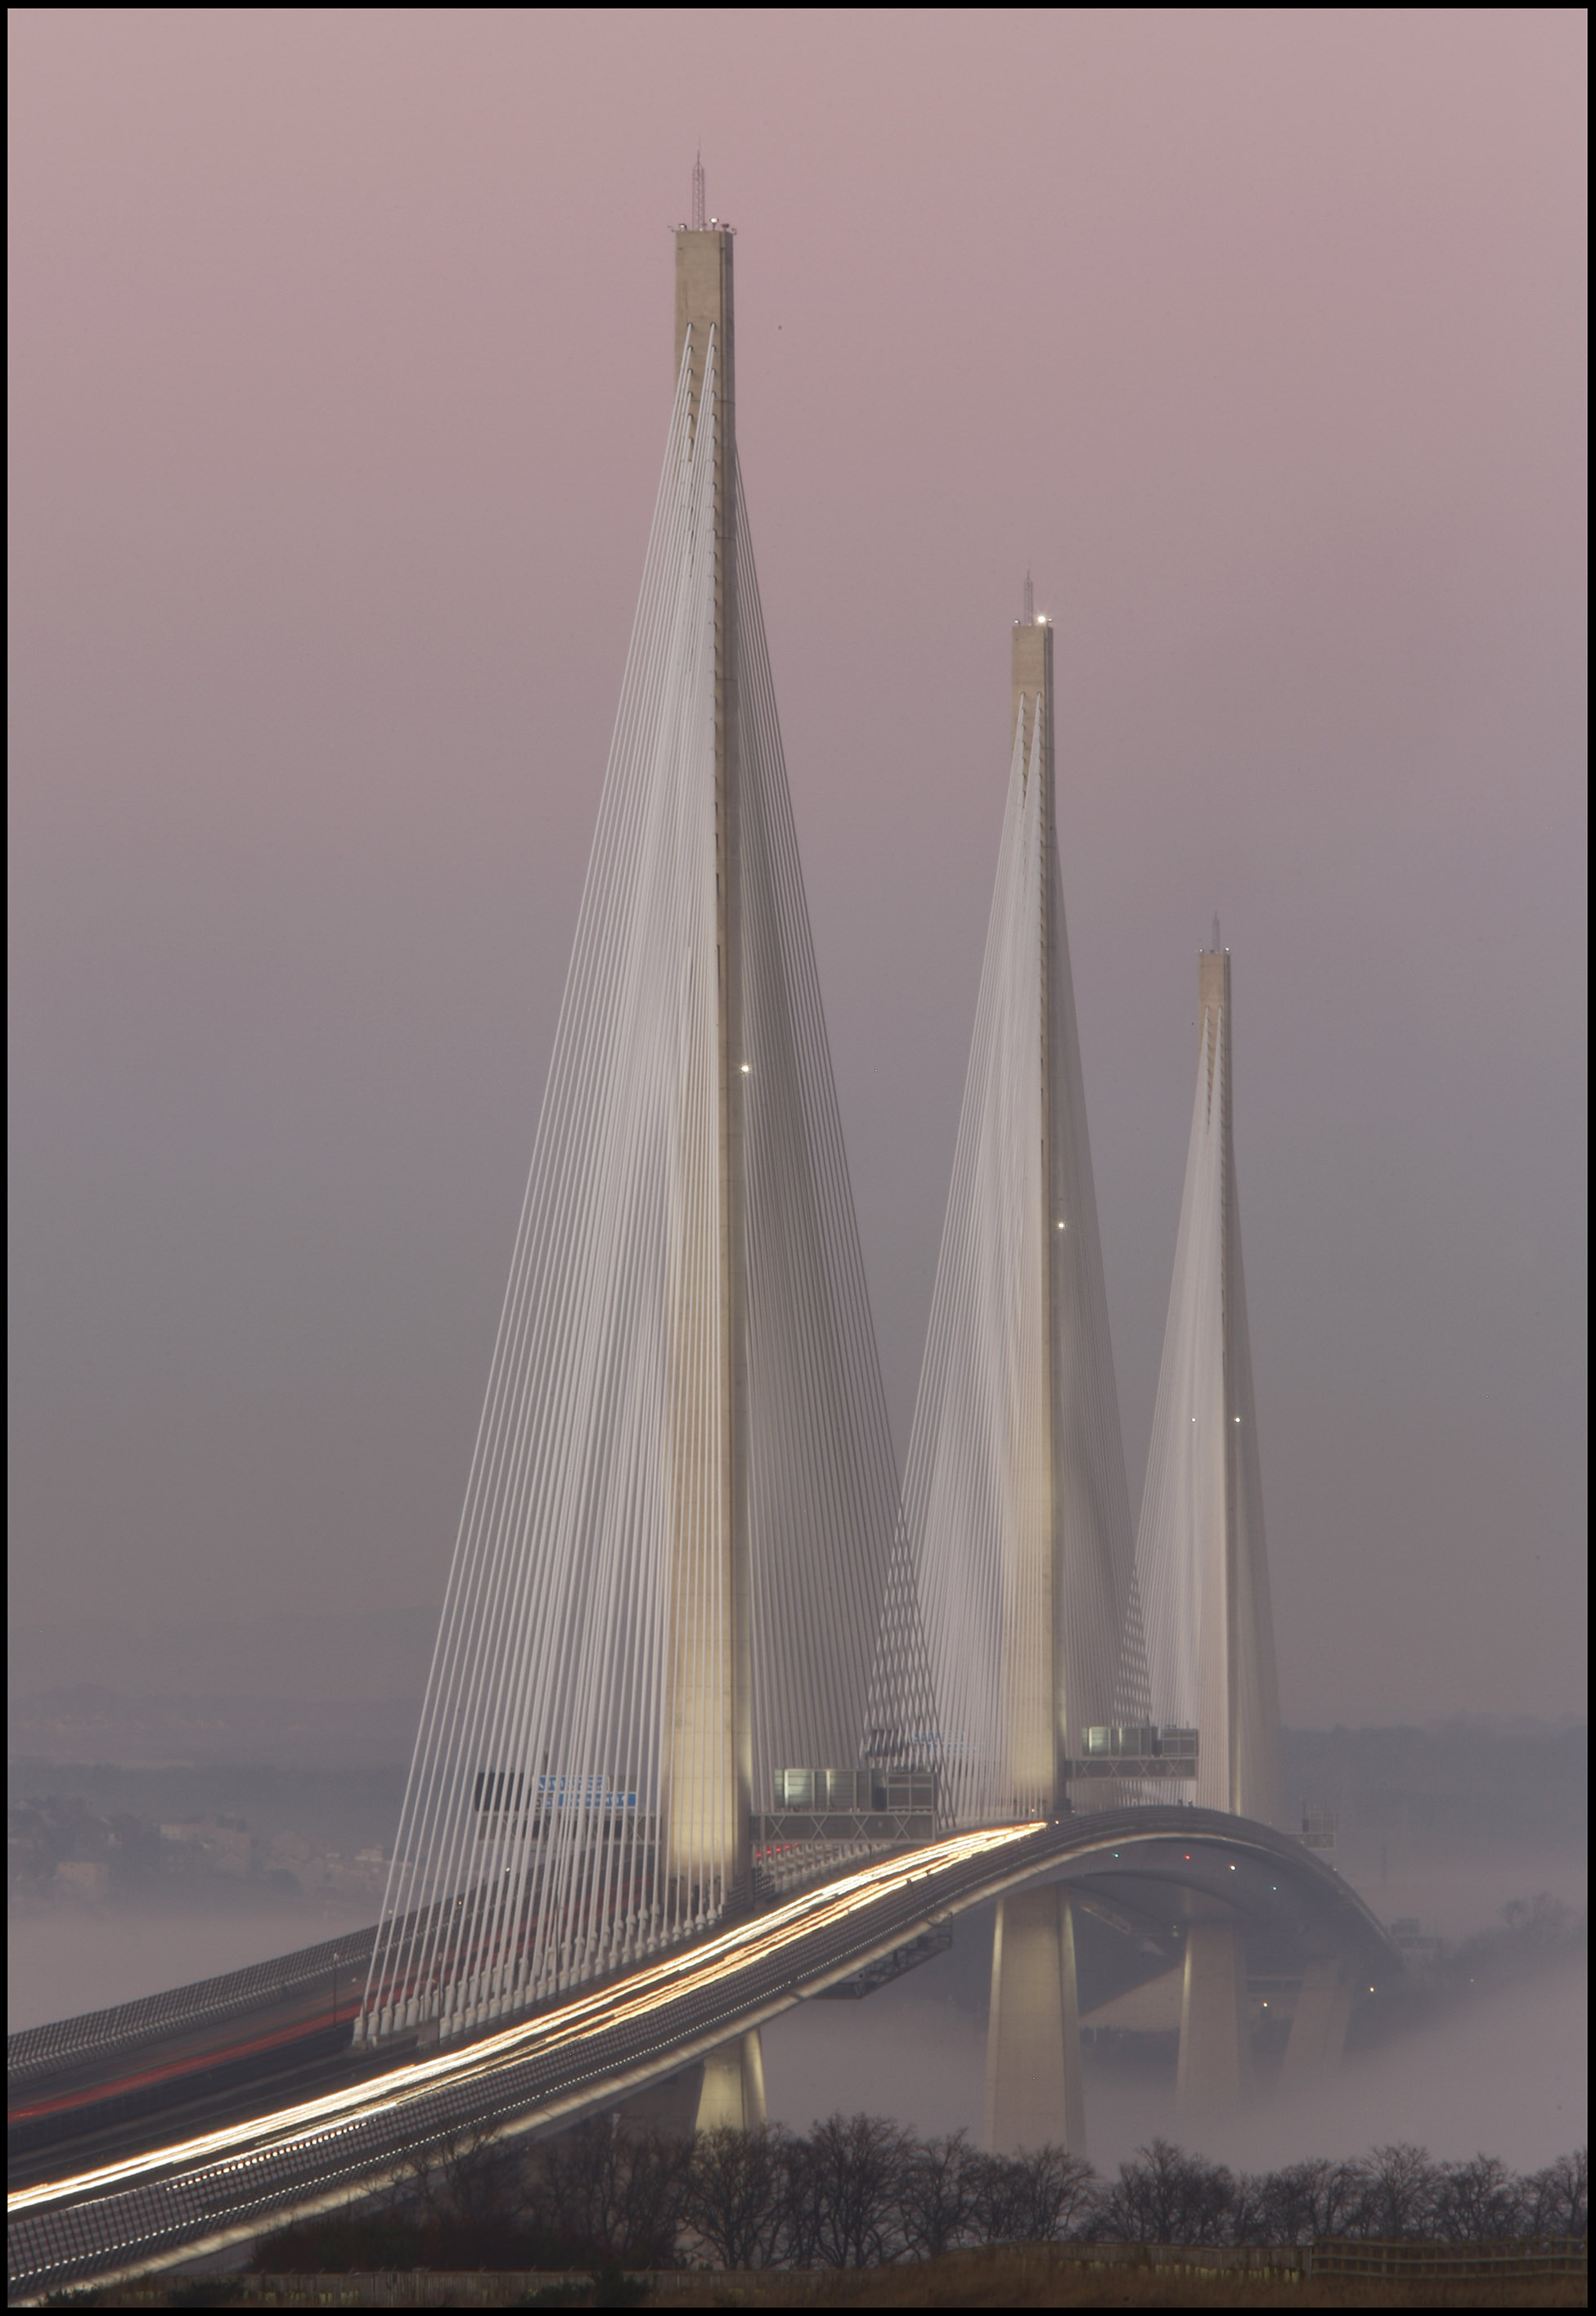 Queensferry Crossing By Viv Cotton